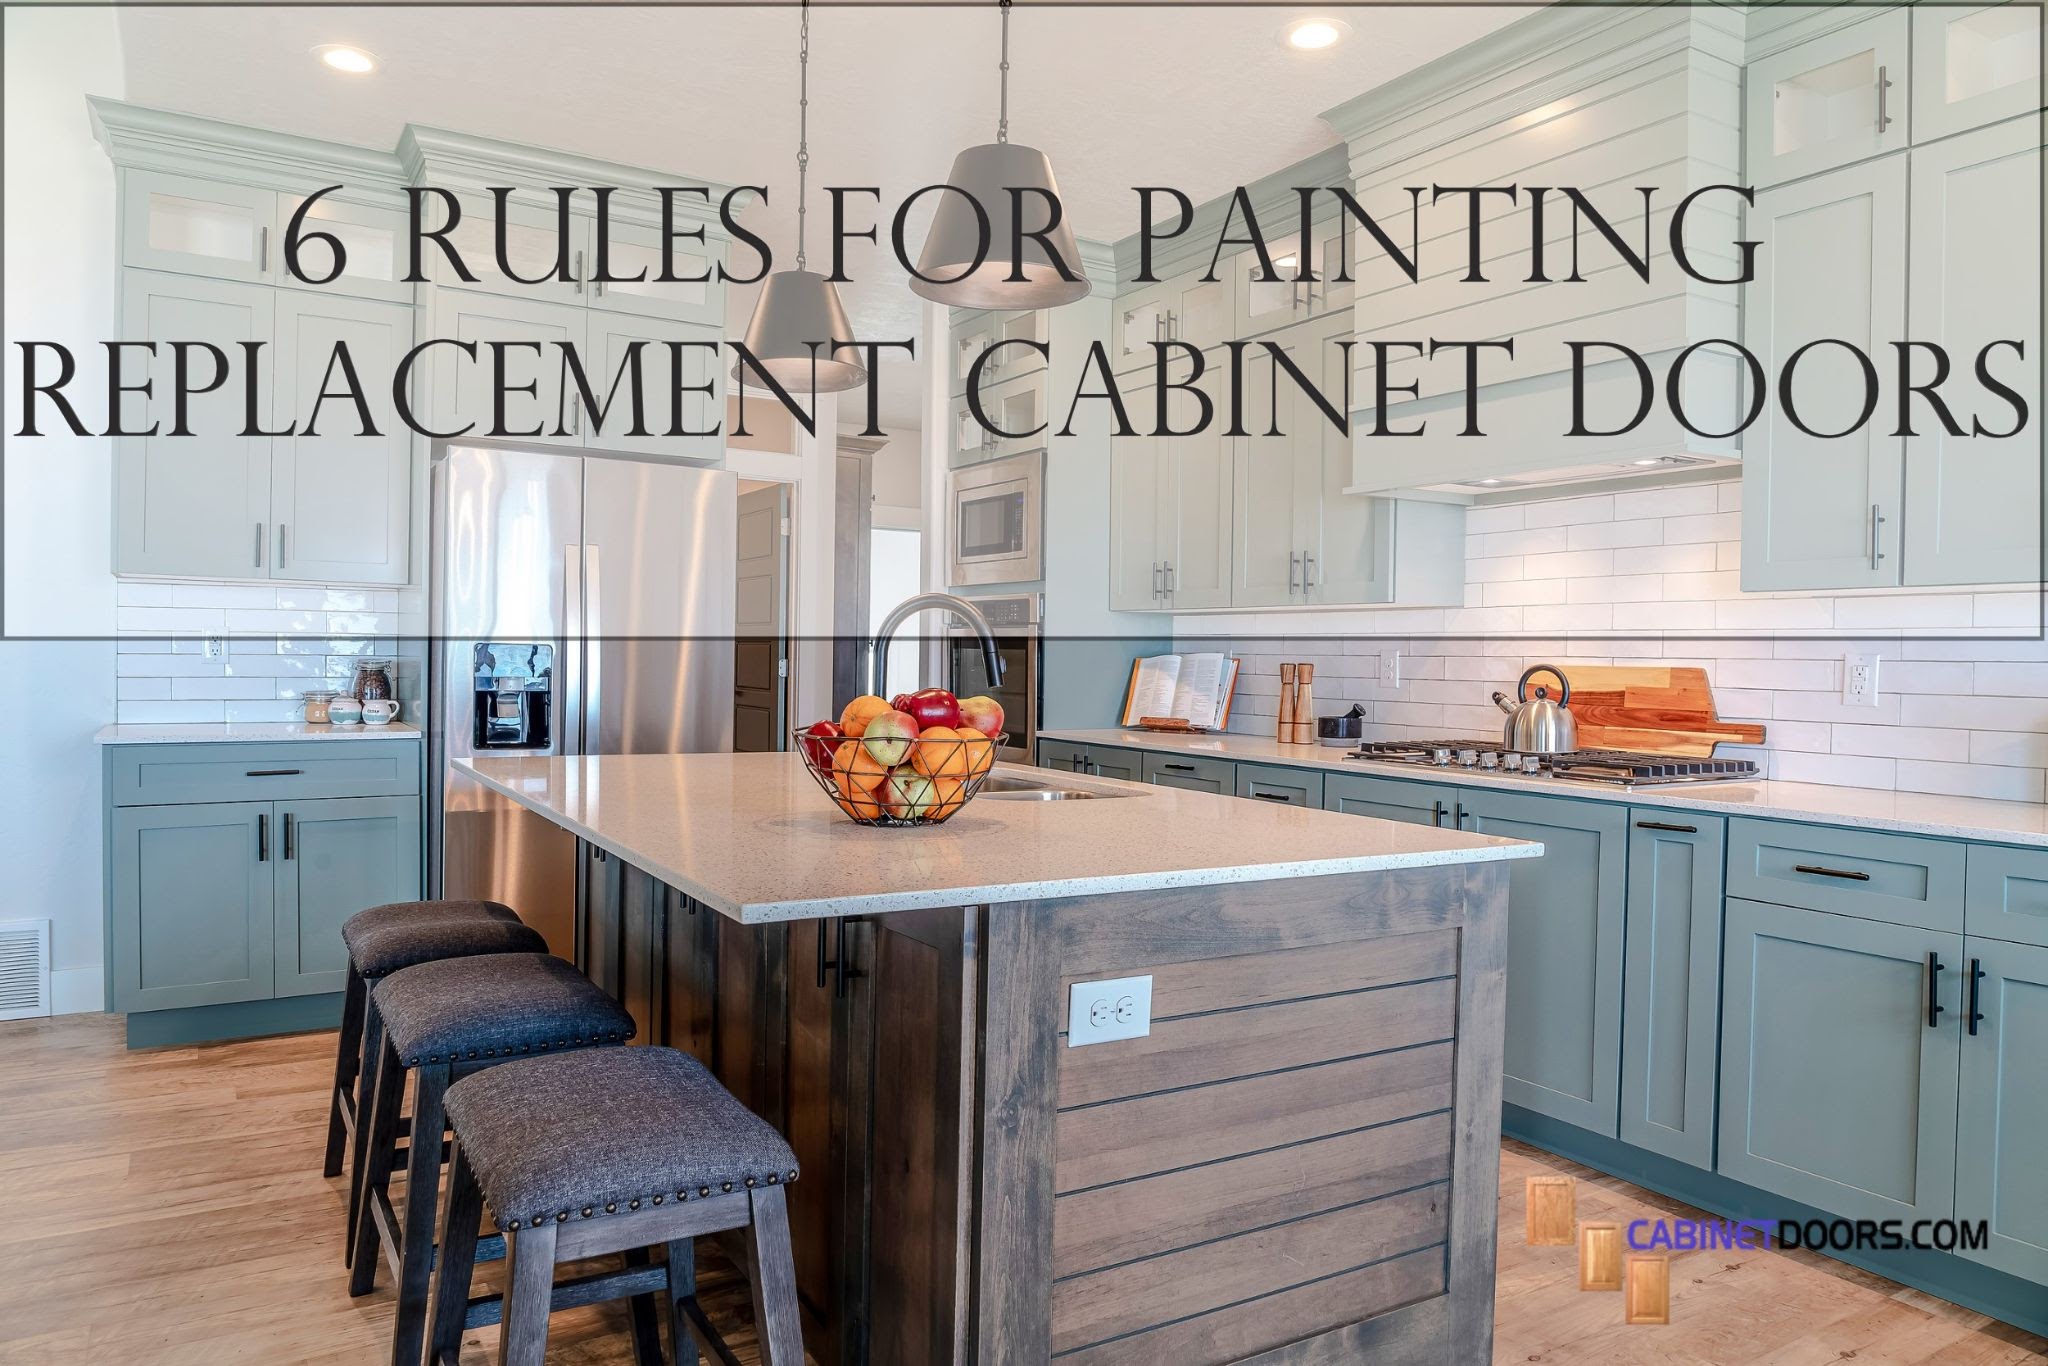 Rules for Painting Replacement Kitchen Cabinet Doors